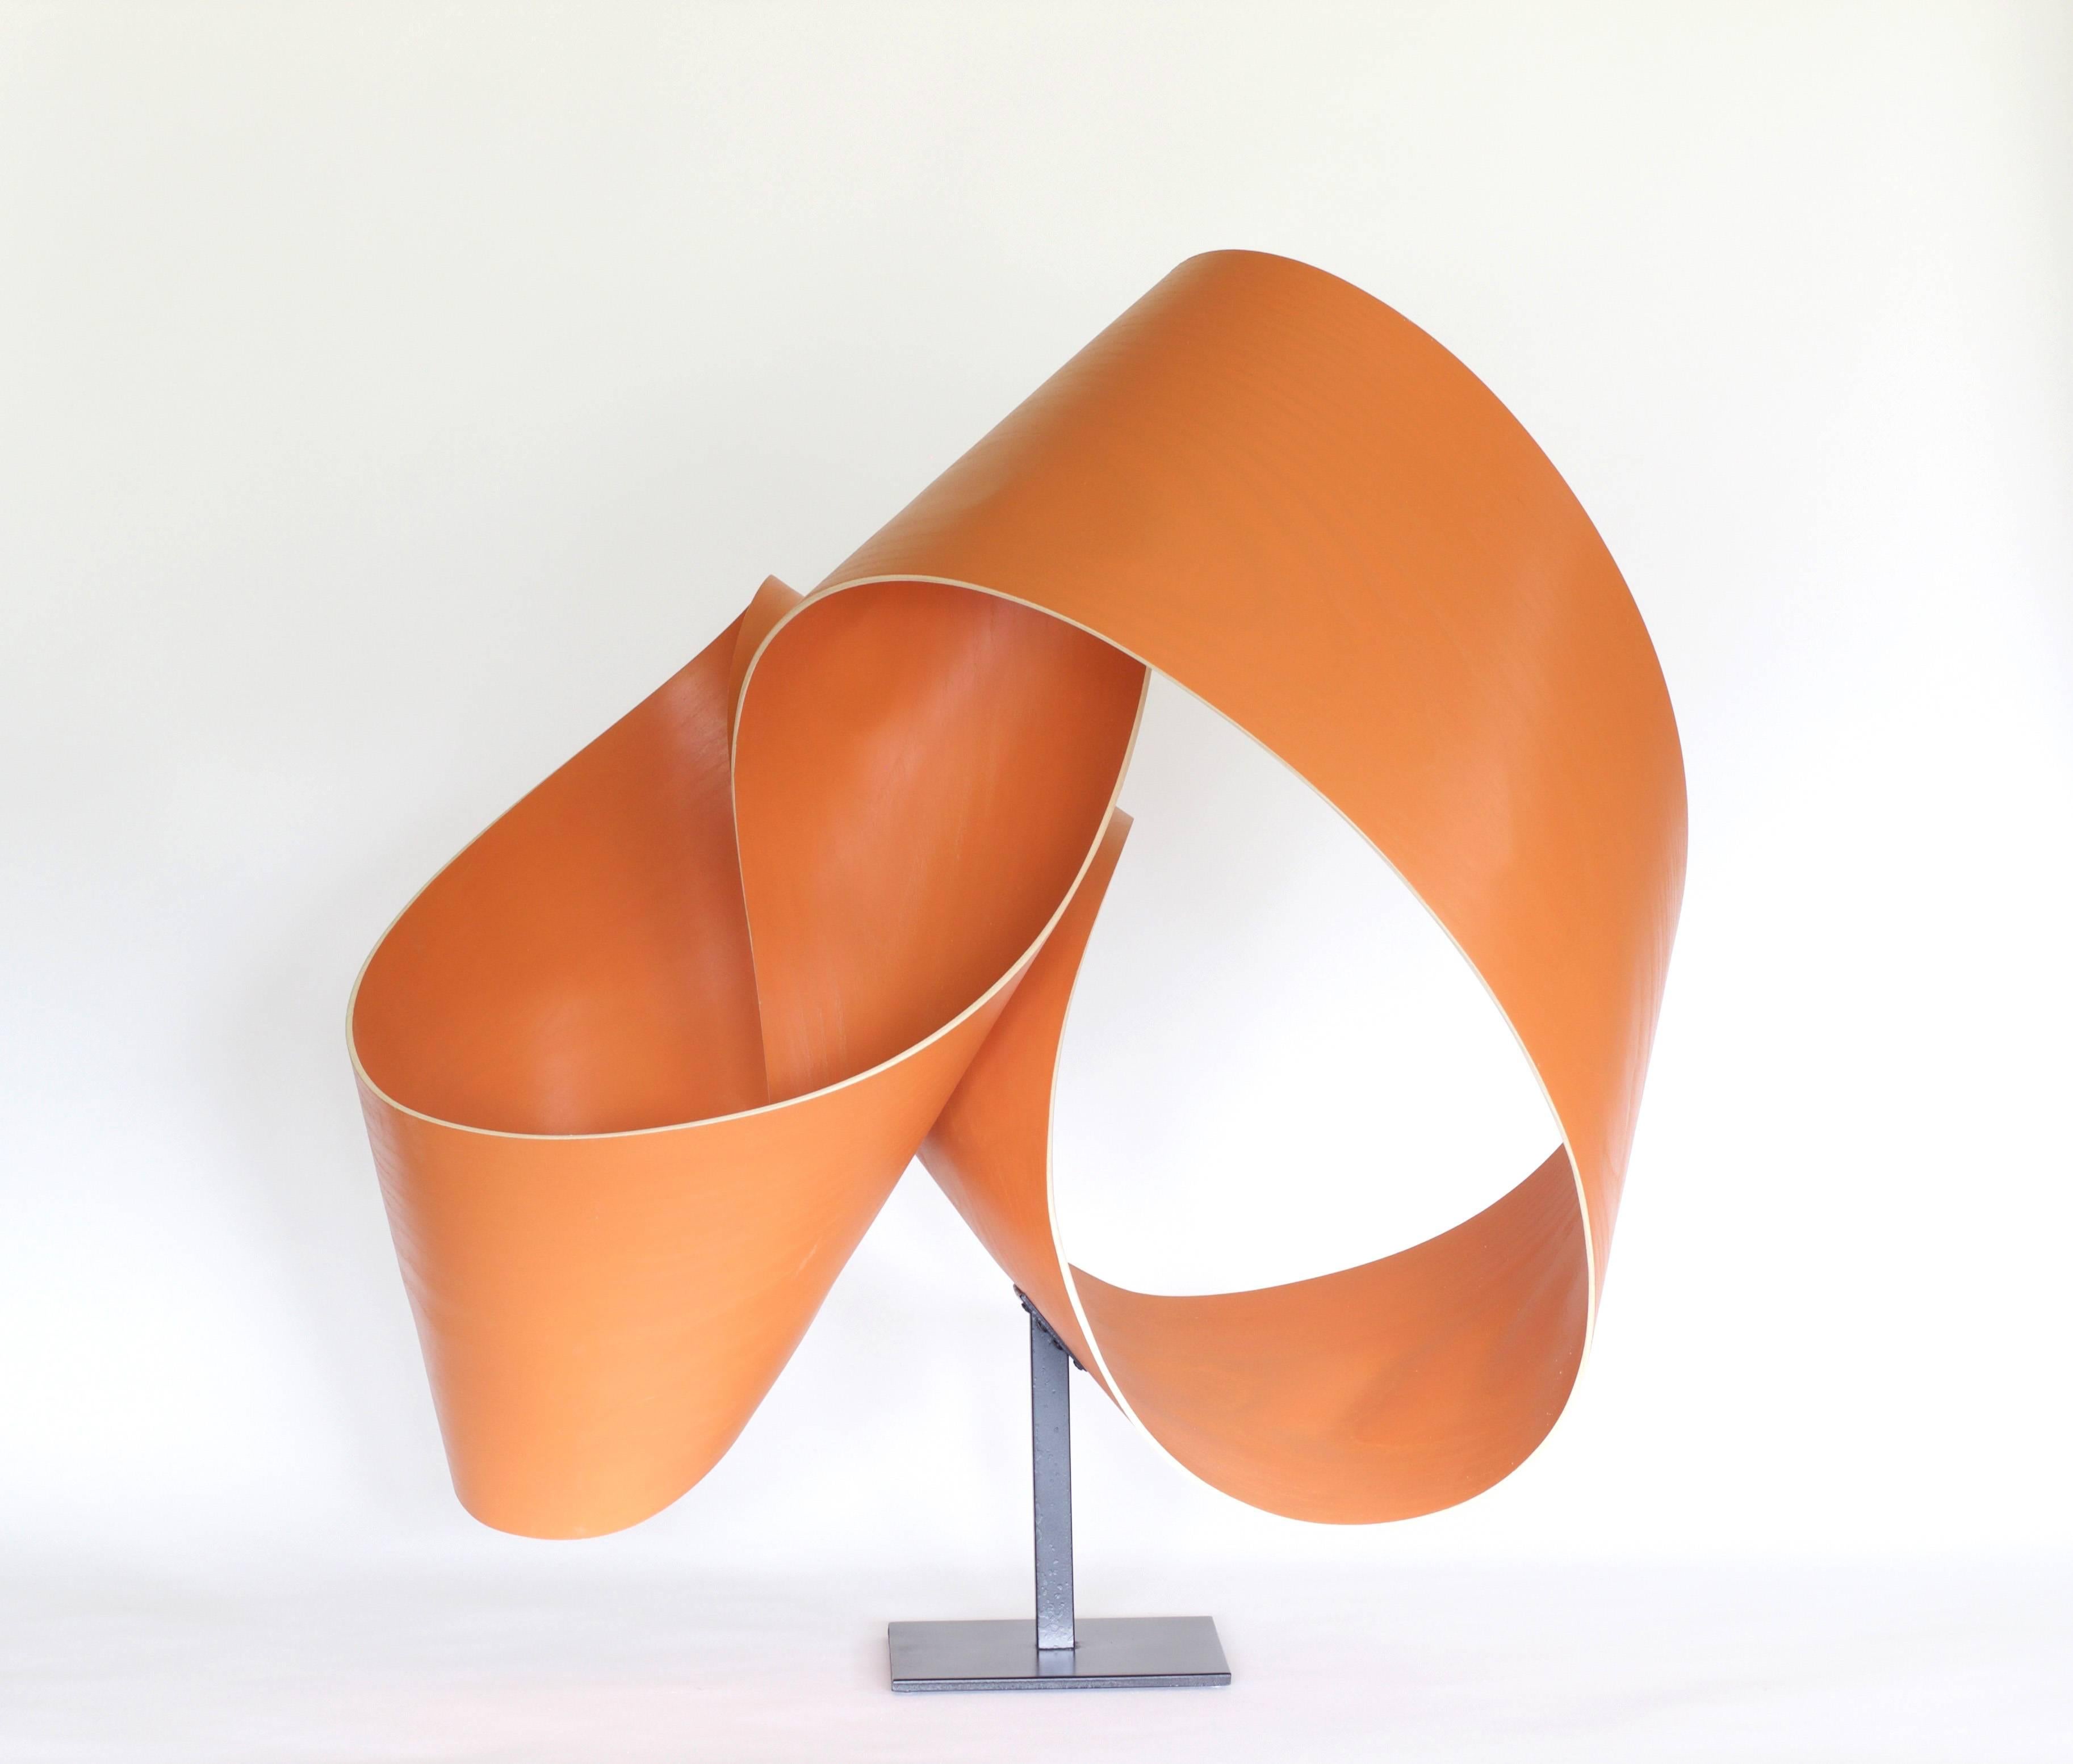 Jeremy Holmes Abstract Sculpture - Atmosphere 318